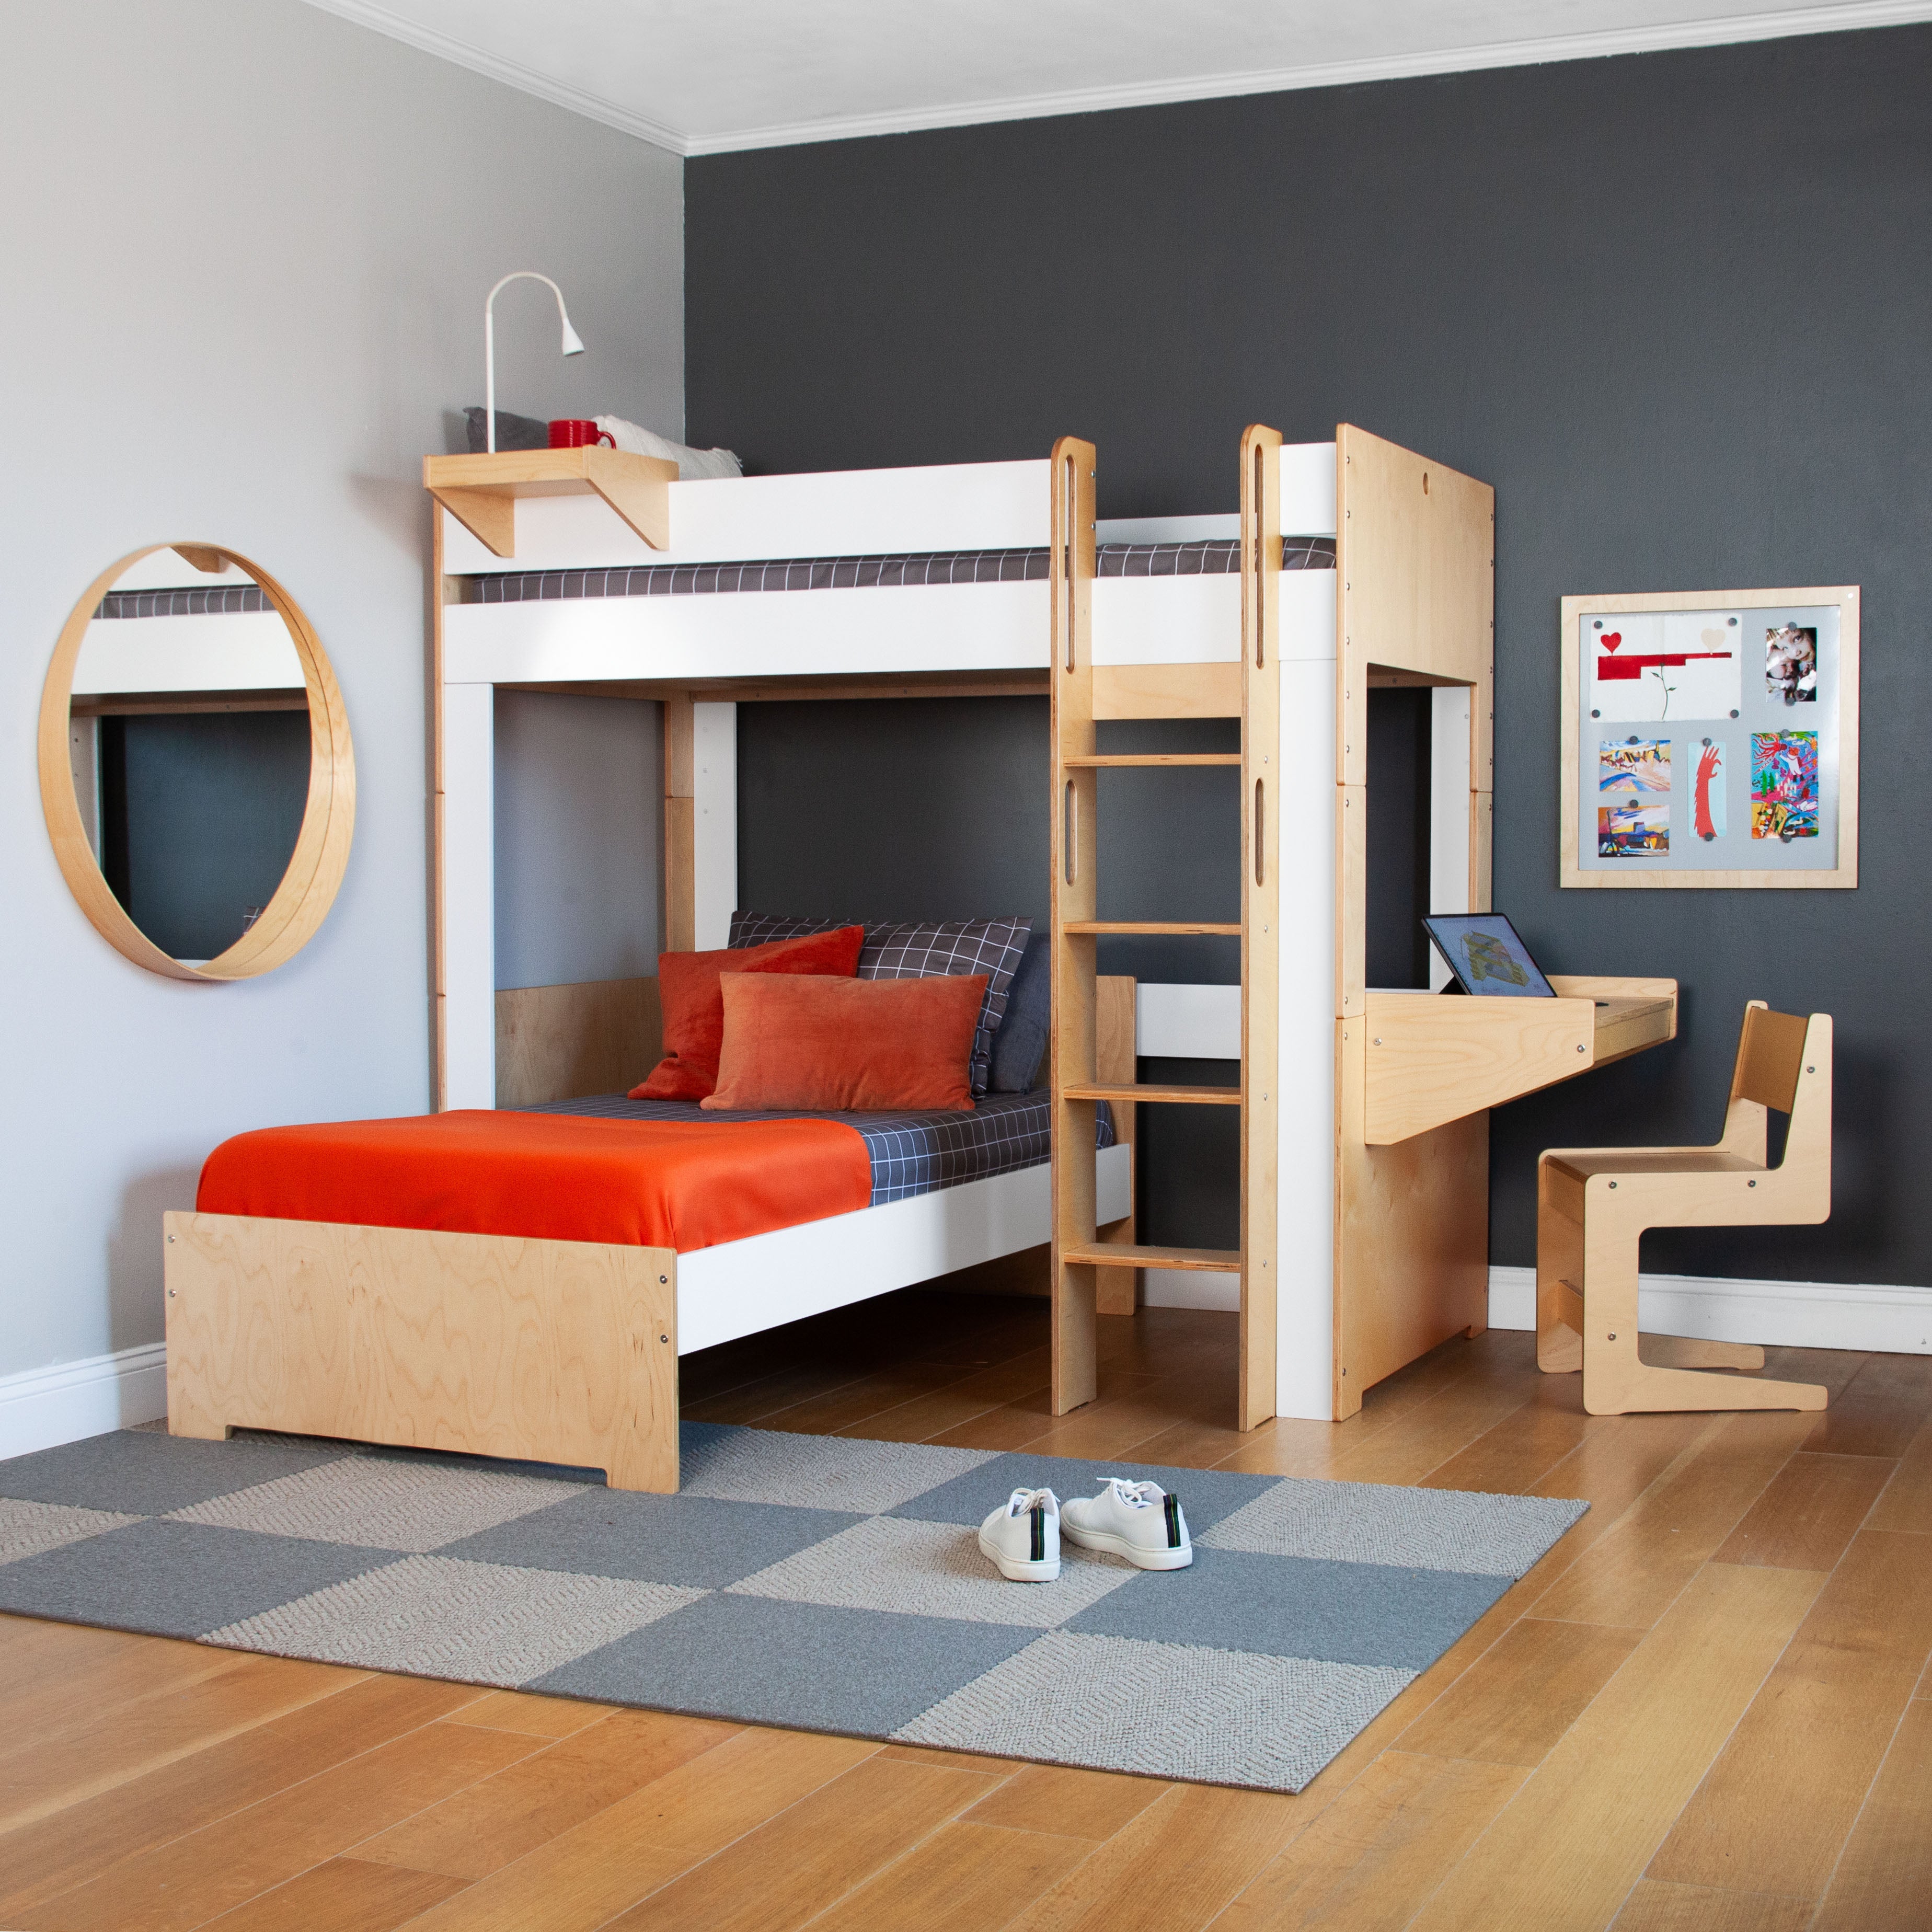 Stylish child's bedroom featuring a bunk bed, sofa bed, study desk, and circular mirror on a gray rug.